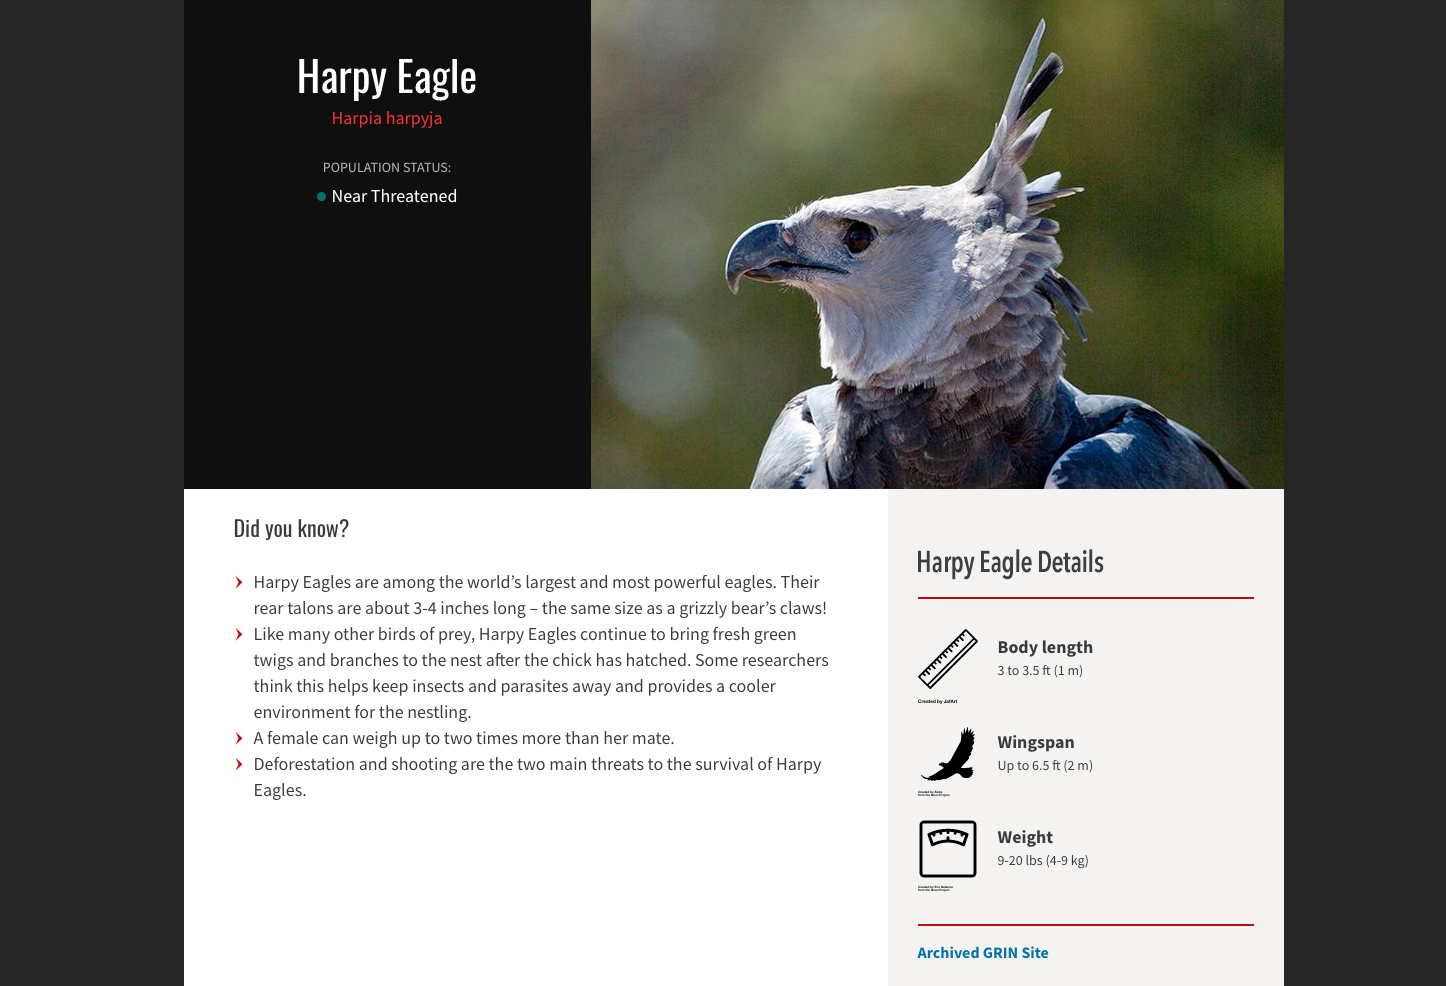 Screenshot of GRIN website's profile of the Harpy Eagle